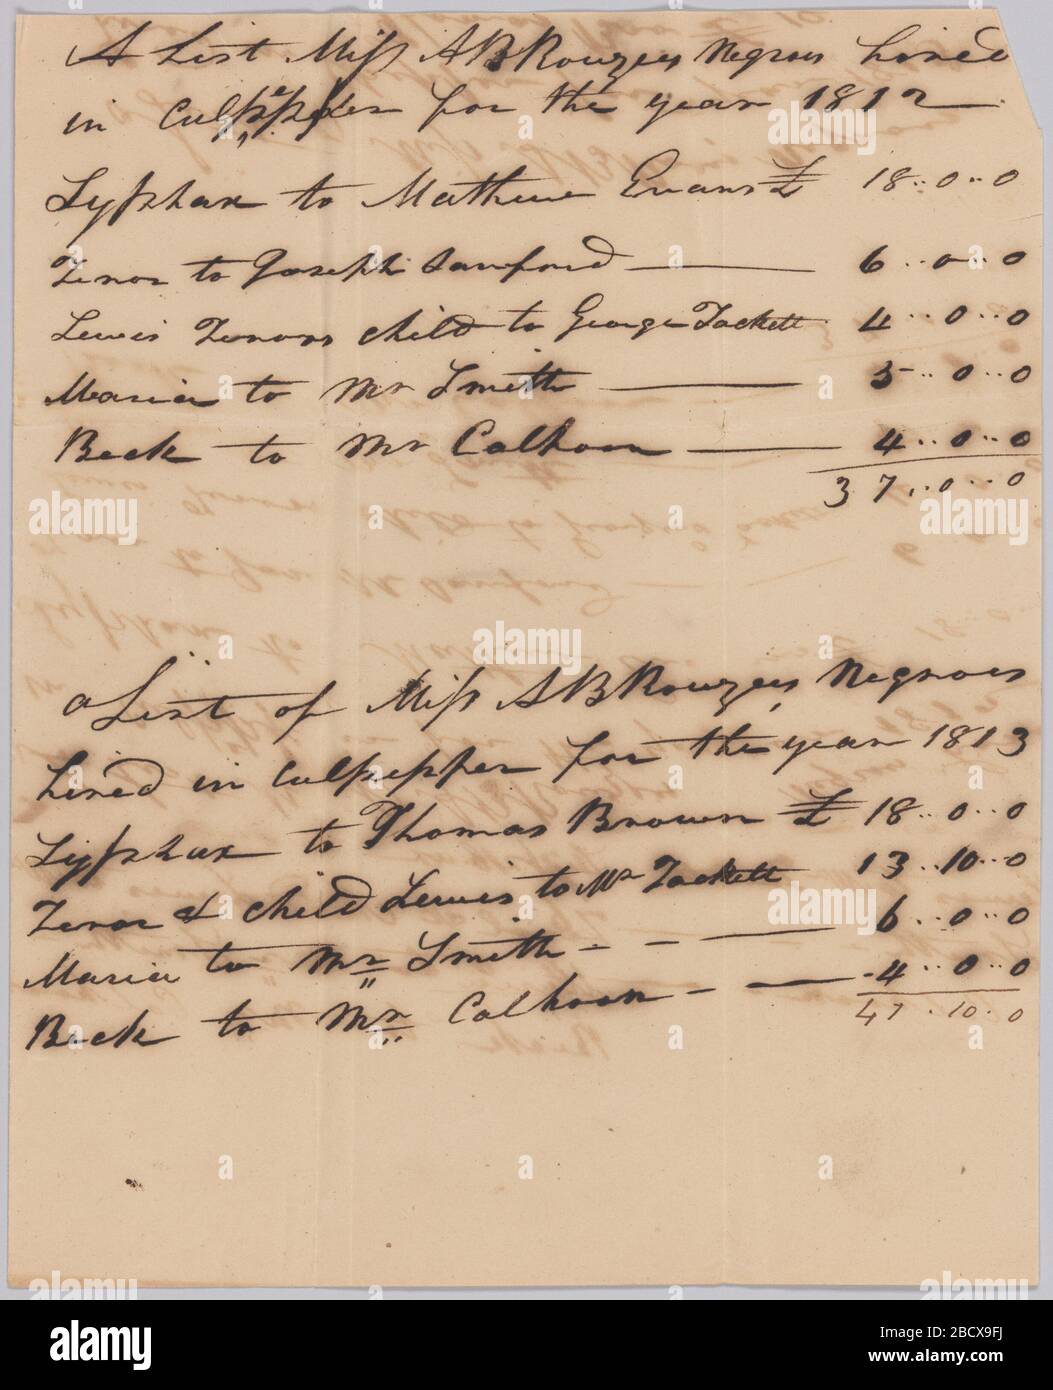 Account of hires of enslaved persons belonging to Apphia Rouzzee for 1812. This document is from a collection of financial papers related to the plantation operations of several generations of the Rouzee Family in Essex County, Virginia. The papers date from the 1790s through 1860.This document contains lists of enslaved persons owned by A.B. Account of hires of enslaved persons belonging to Apphia Rouzzee for 1812 Stock Photo